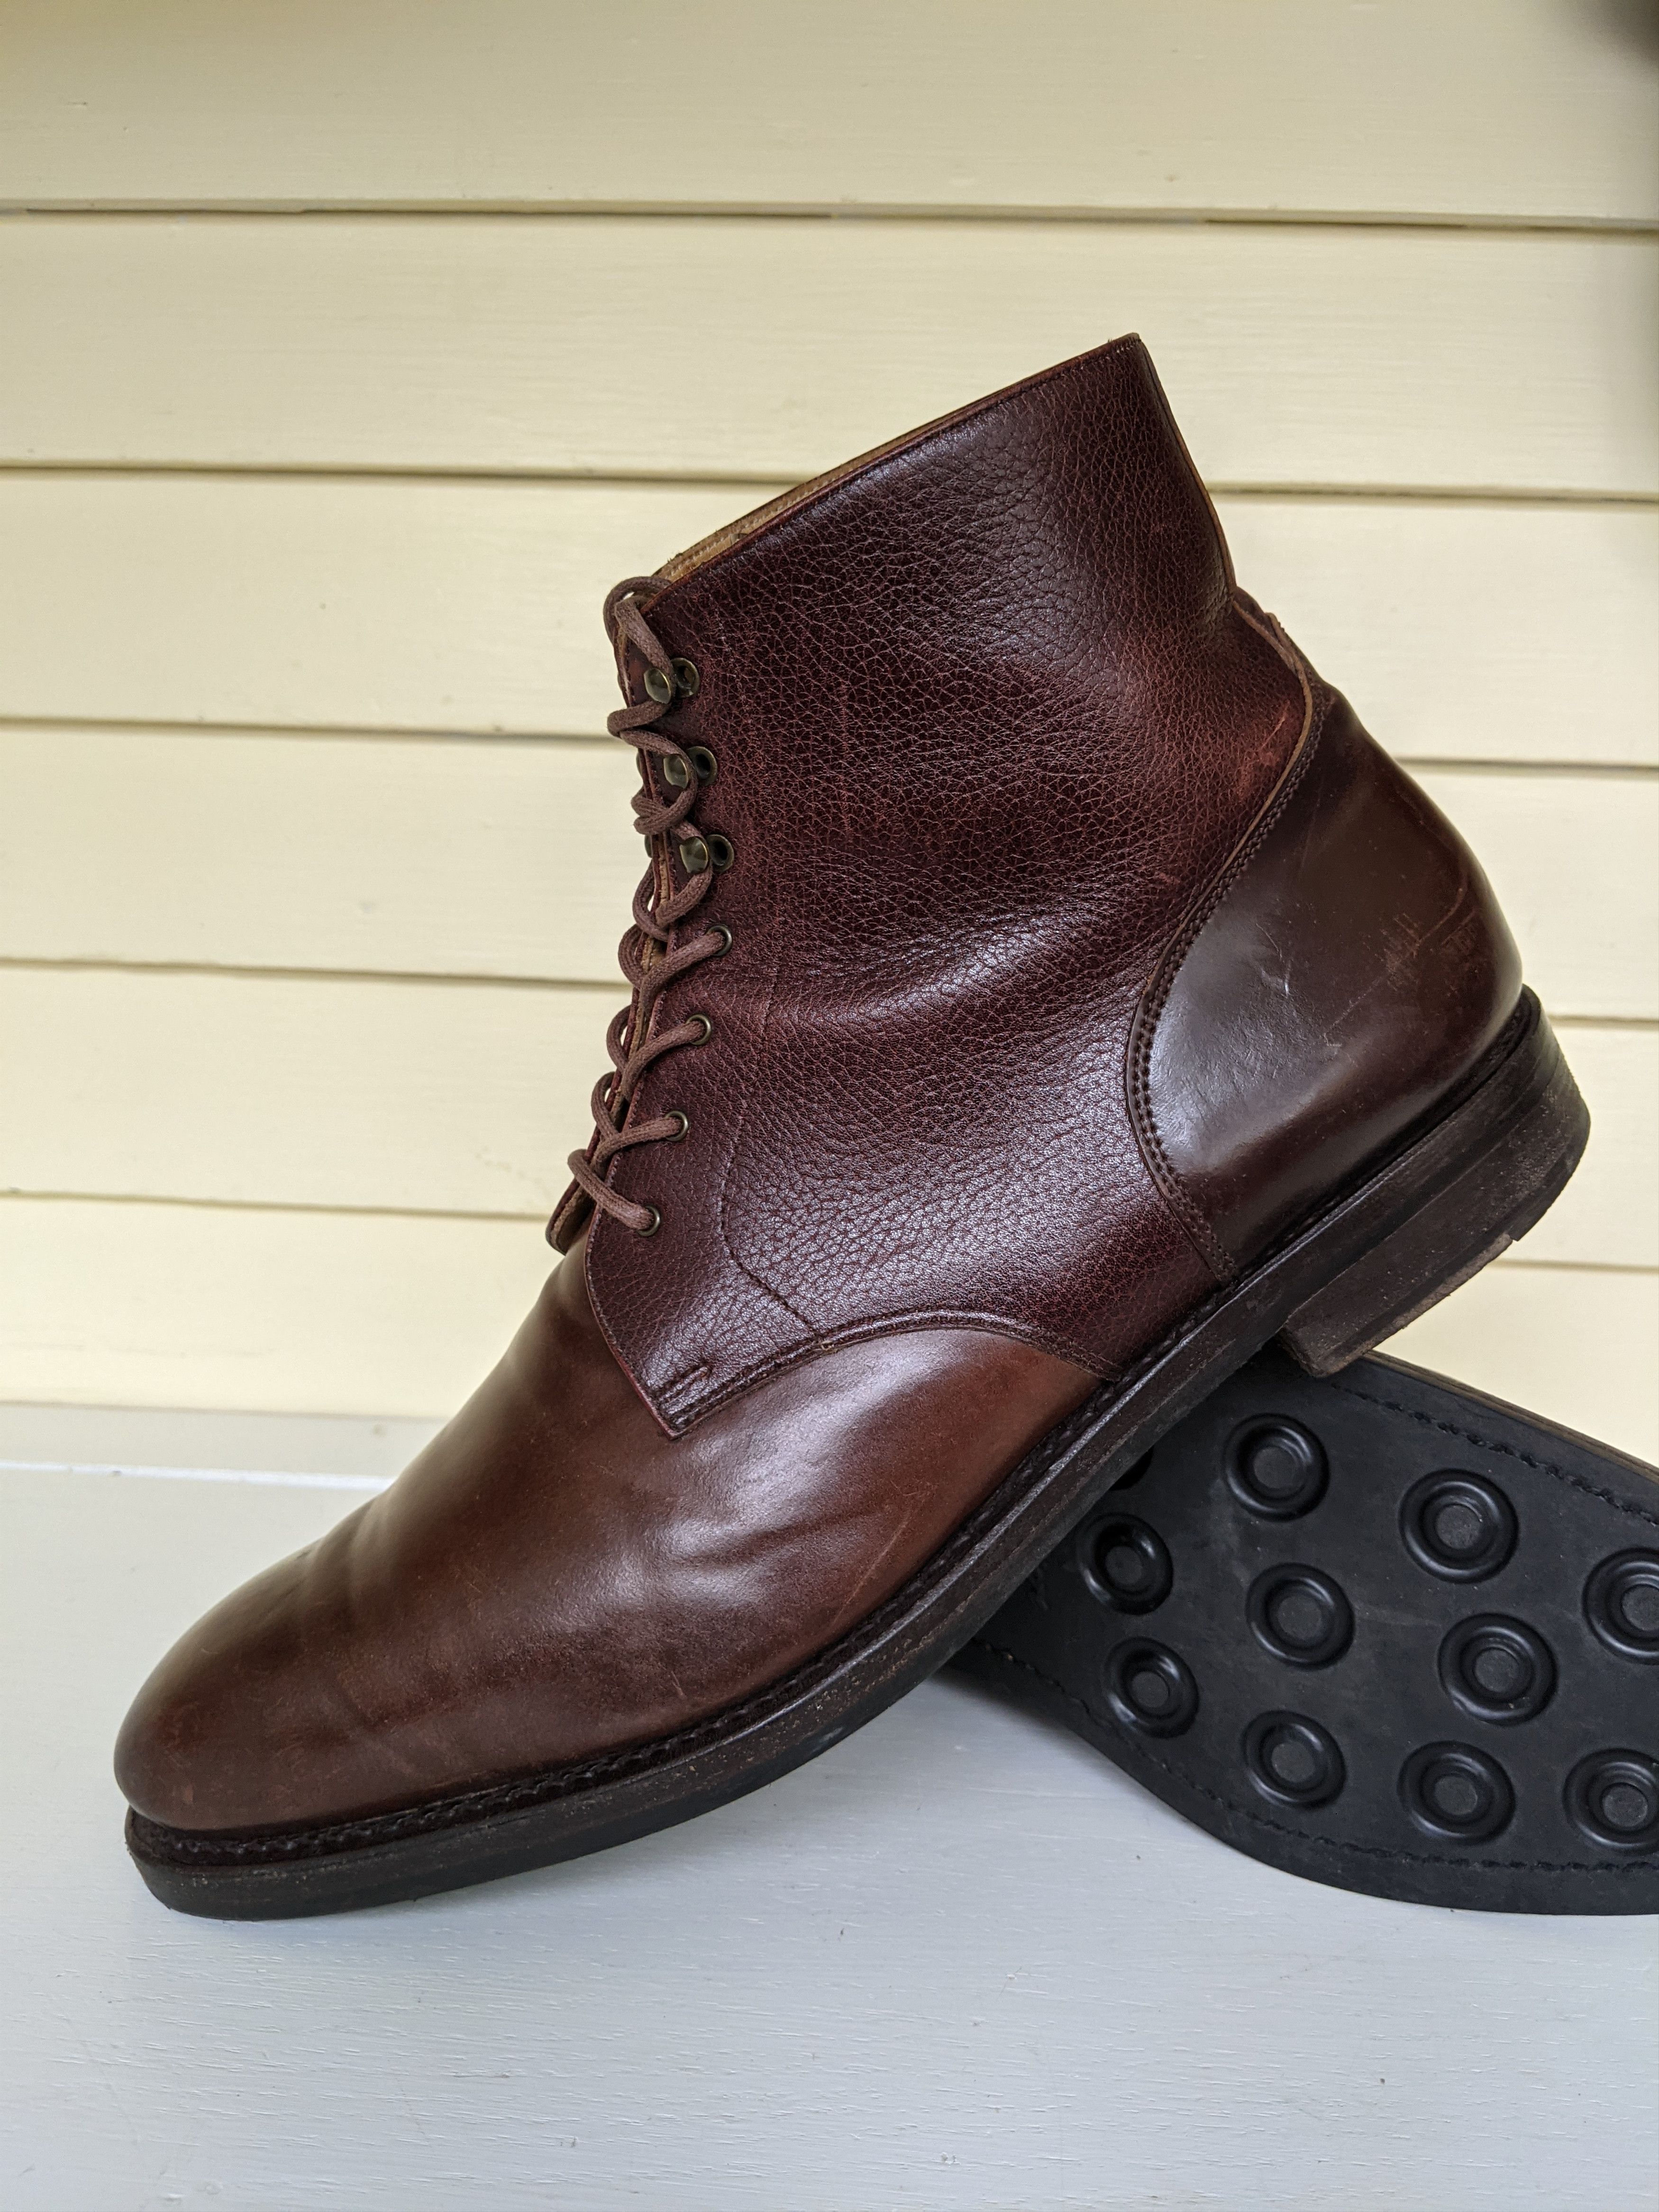 Rider Boot Co. Shell Cordovan Boots Rider Boot Co. 11.5 Size US 11.5 / EU 44-45 - 2 Preview